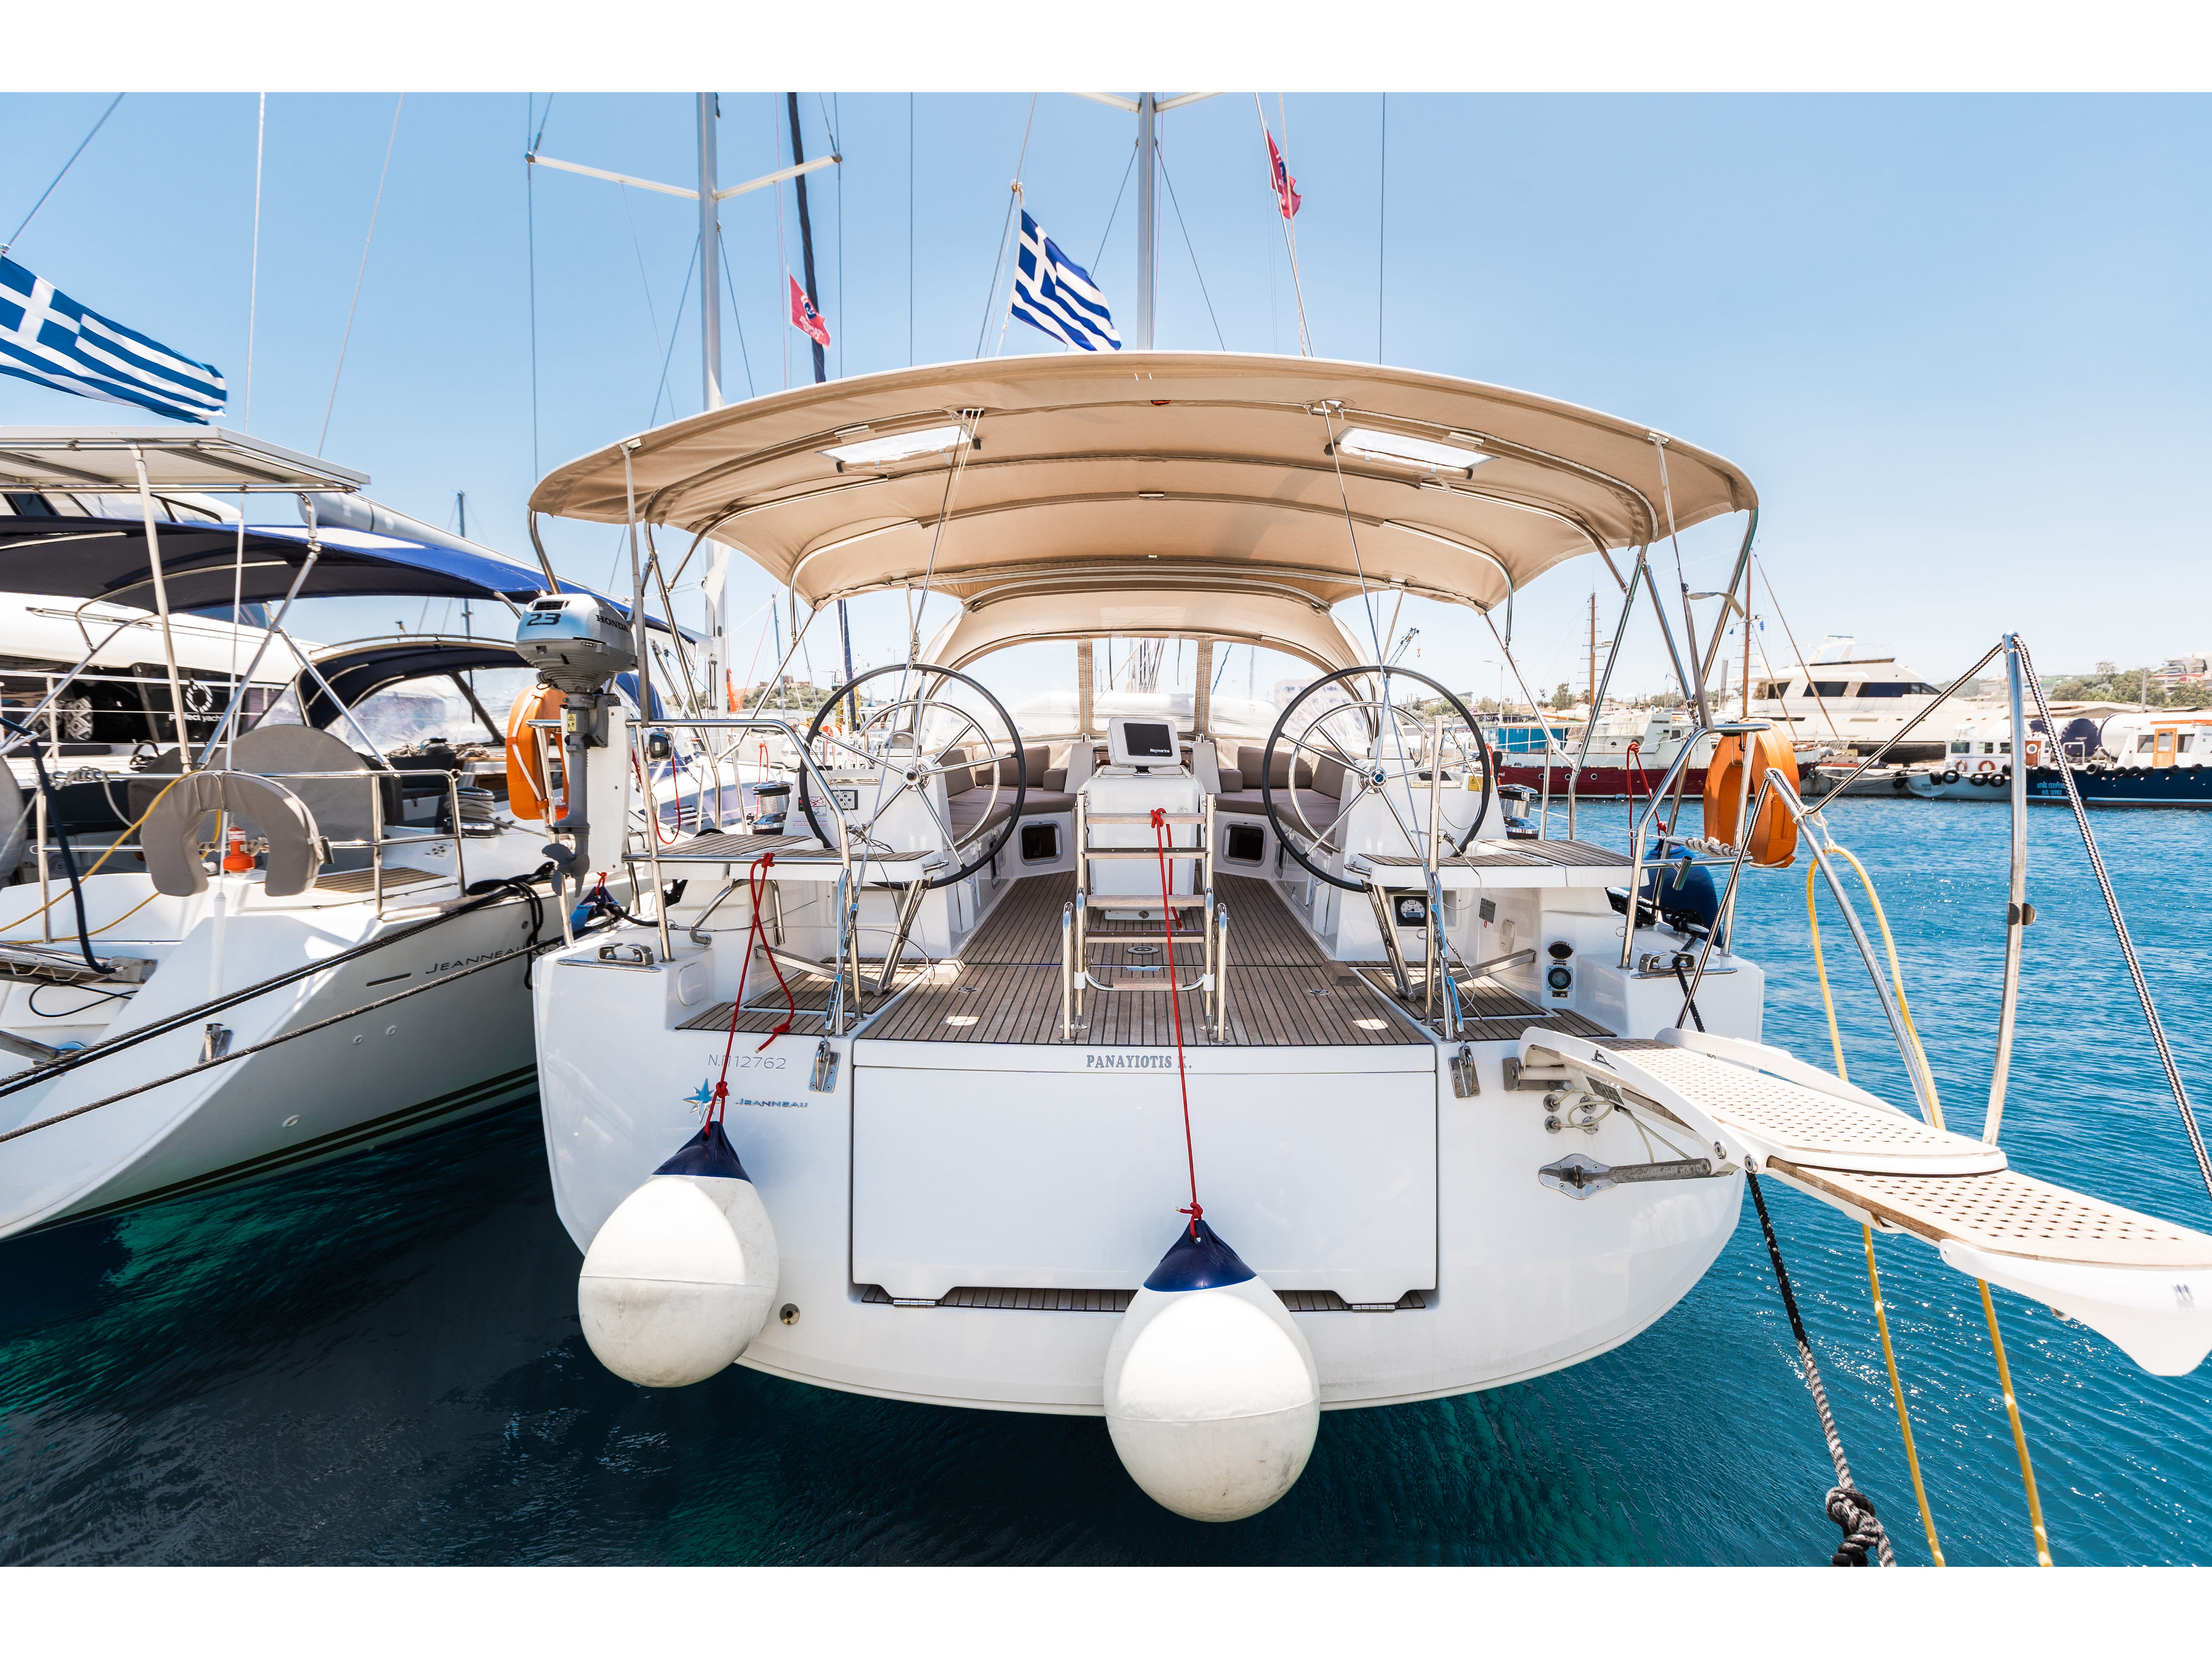 Jeanneau 54 - Yacht Charter Lavrion & Boat hire in Greece Athens and Saronic Gulf Lavrion Lavrion Main Port 2